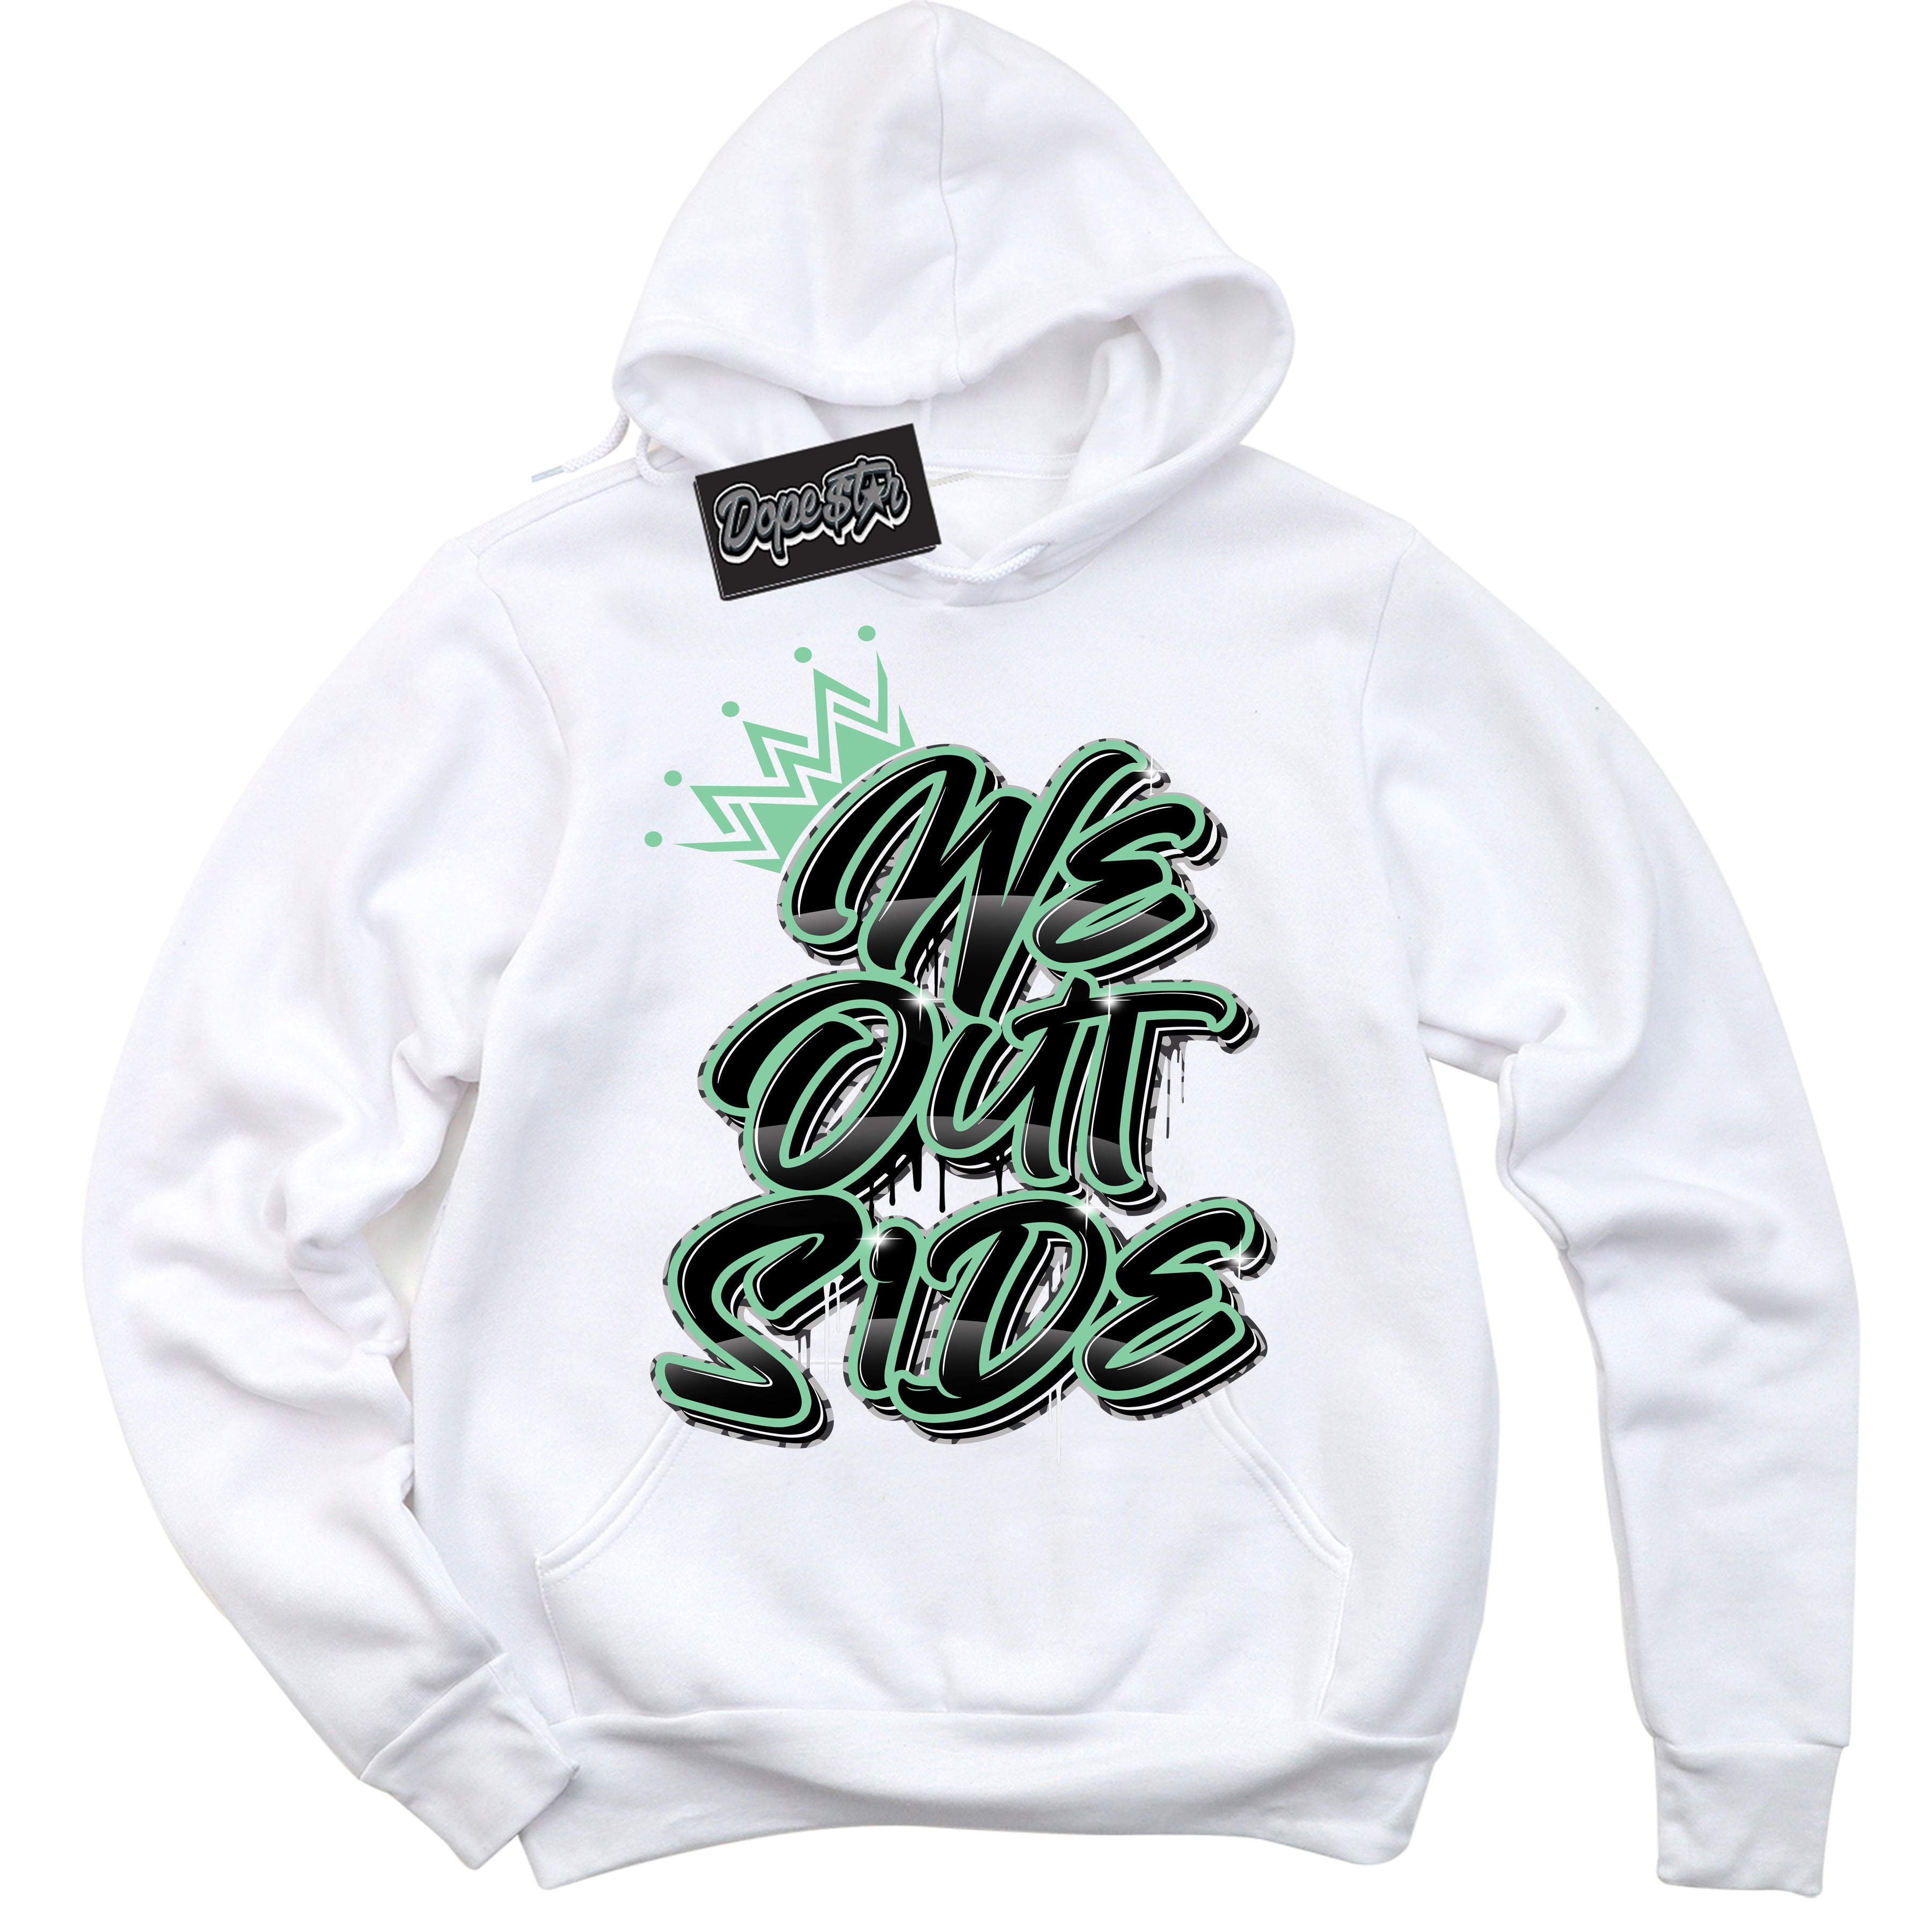 Cool White Graphic DopeStar Hoodie with “ We Outside “ print, that perfectly matches Green Glow 3s sneakers